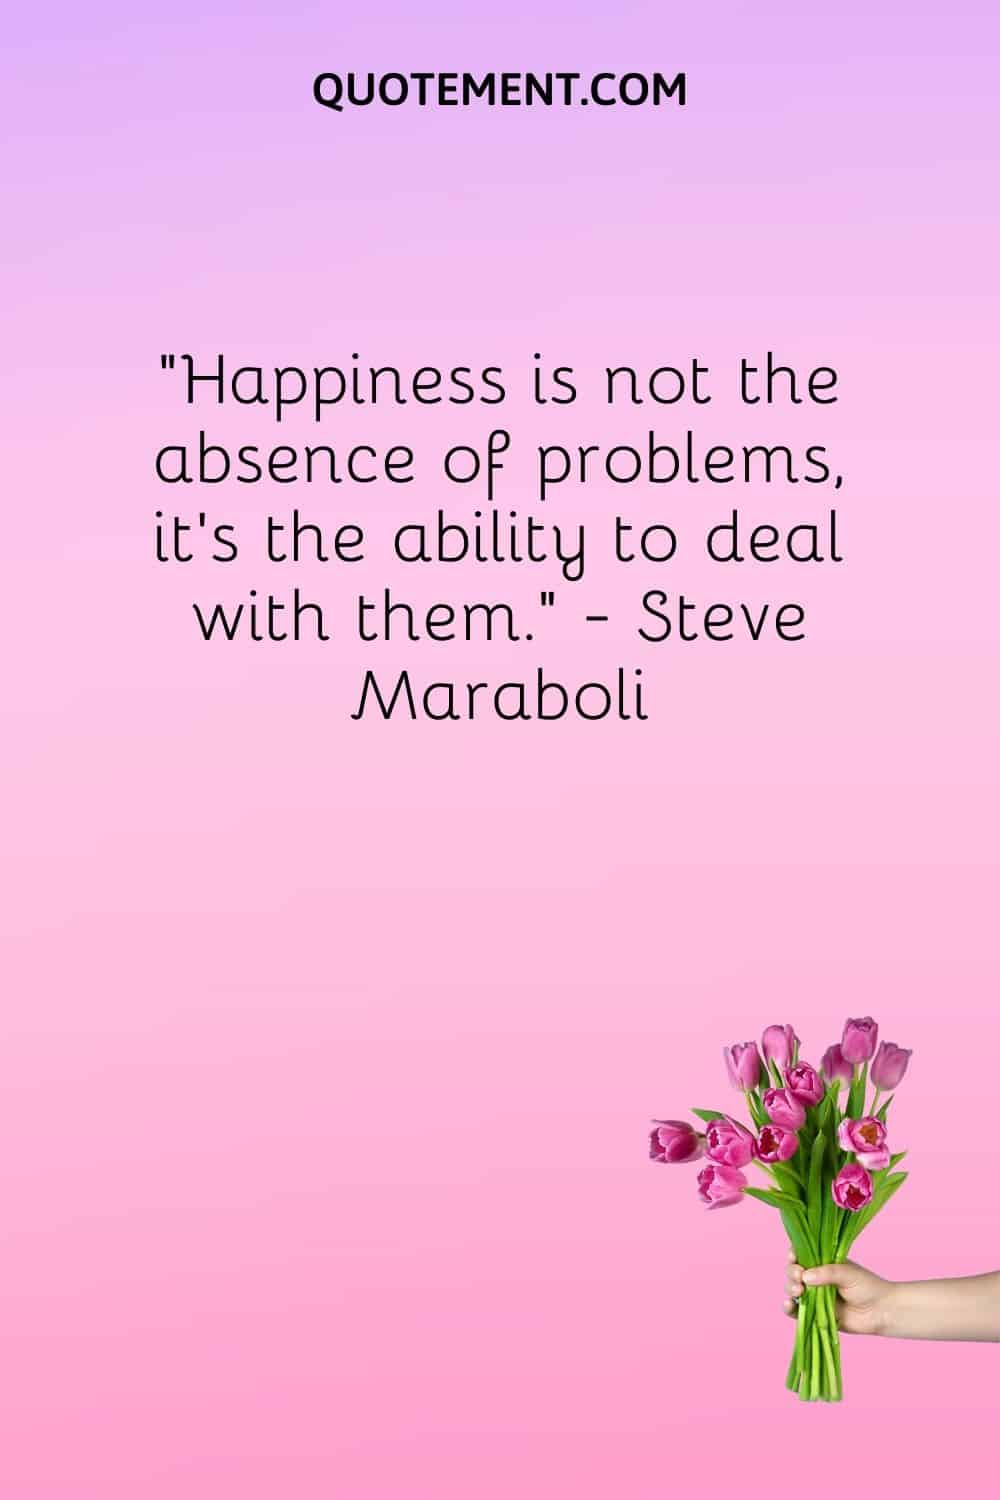 Happiness is not the absence of problems, it's the ability to deal with them